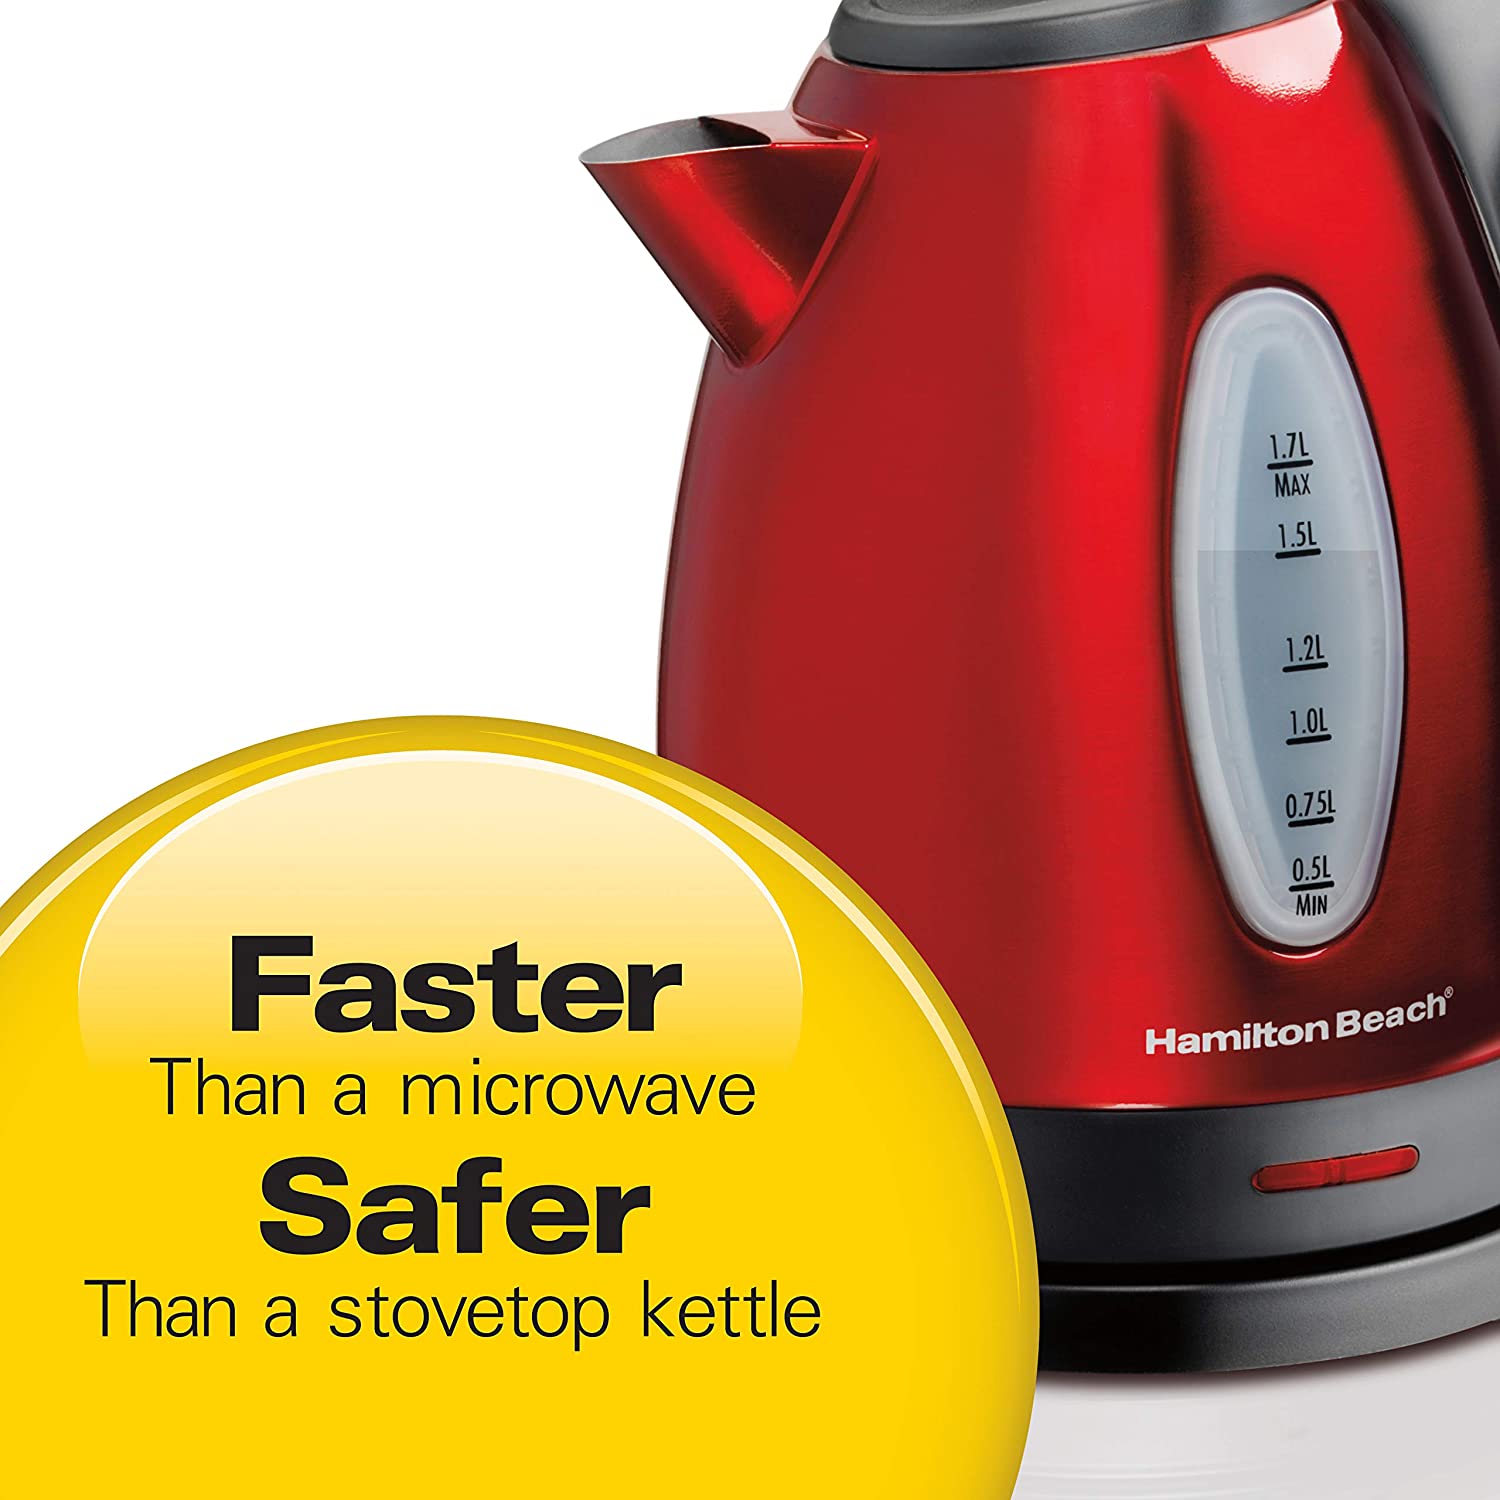 Electric Kettle 1.7l Red